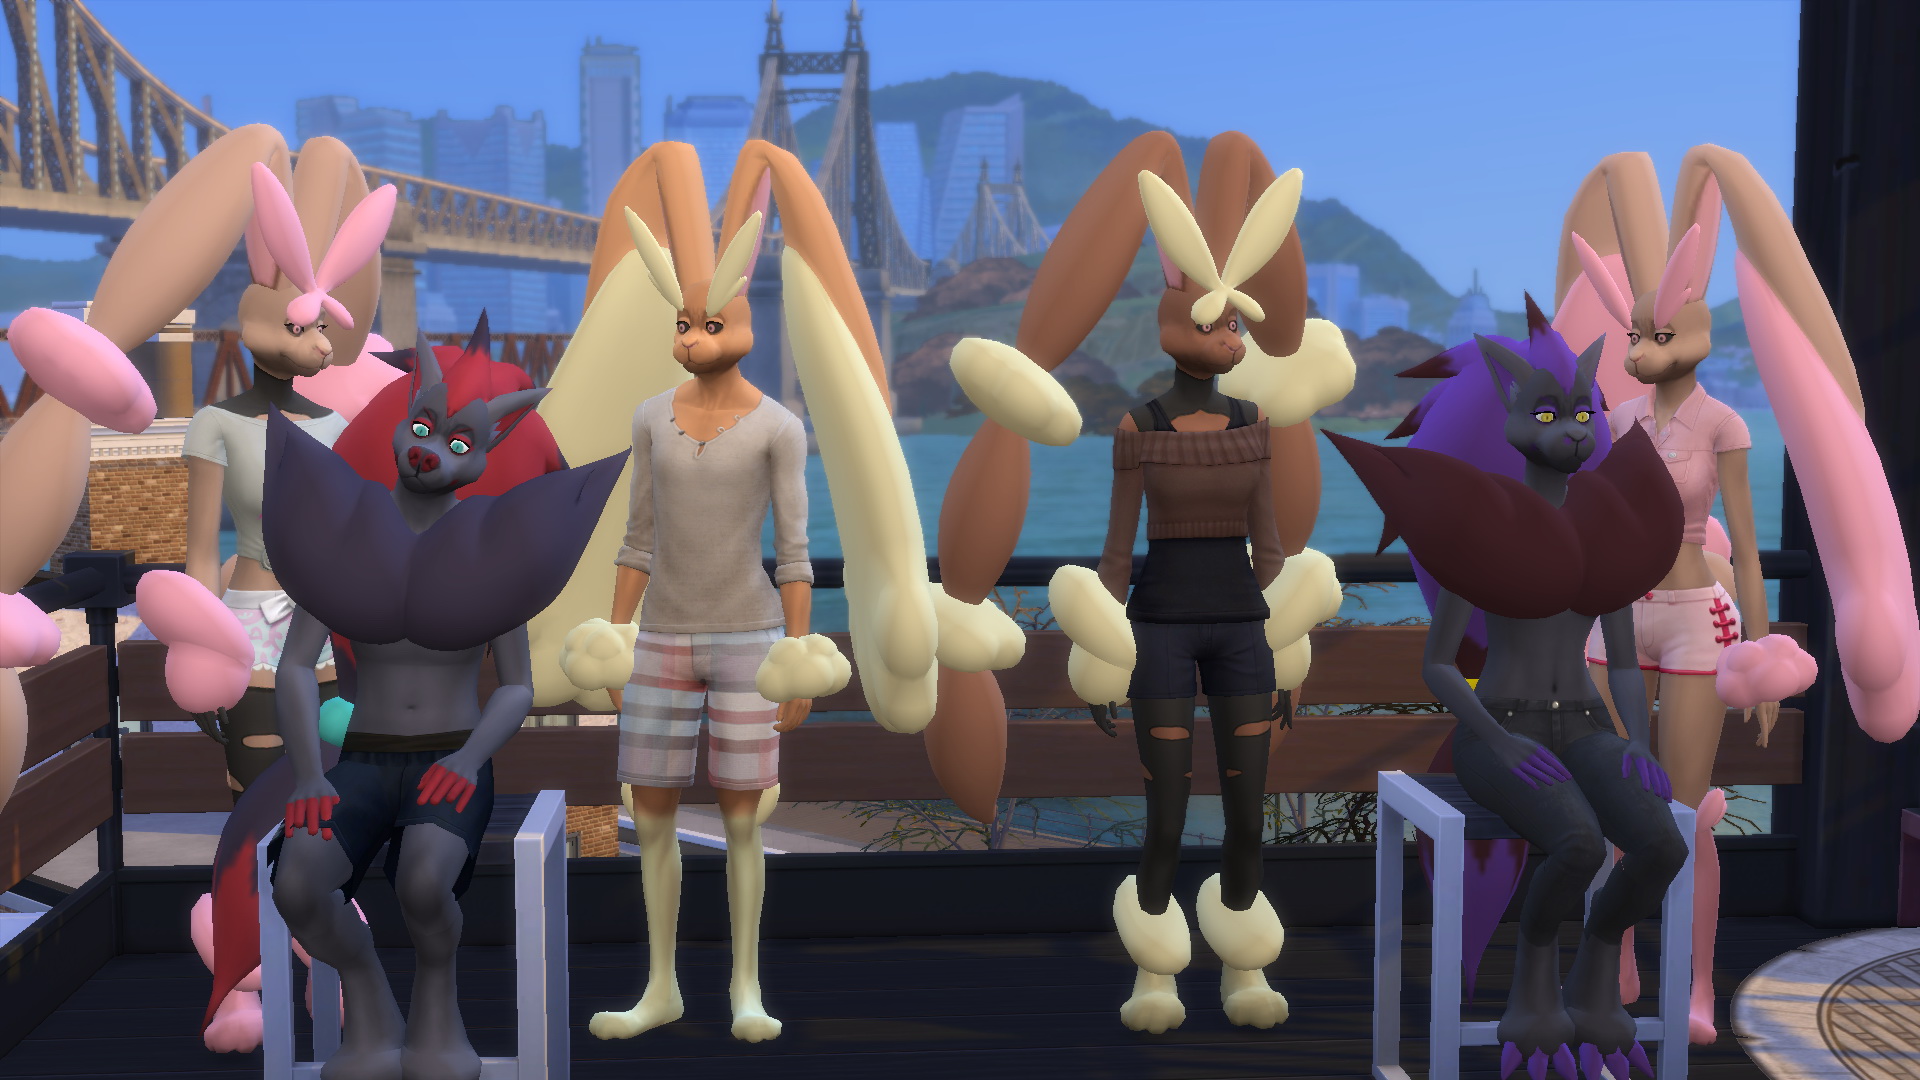 Play as a Lopunny and/or Zoroark from Pokemon by Leljas from Mod The